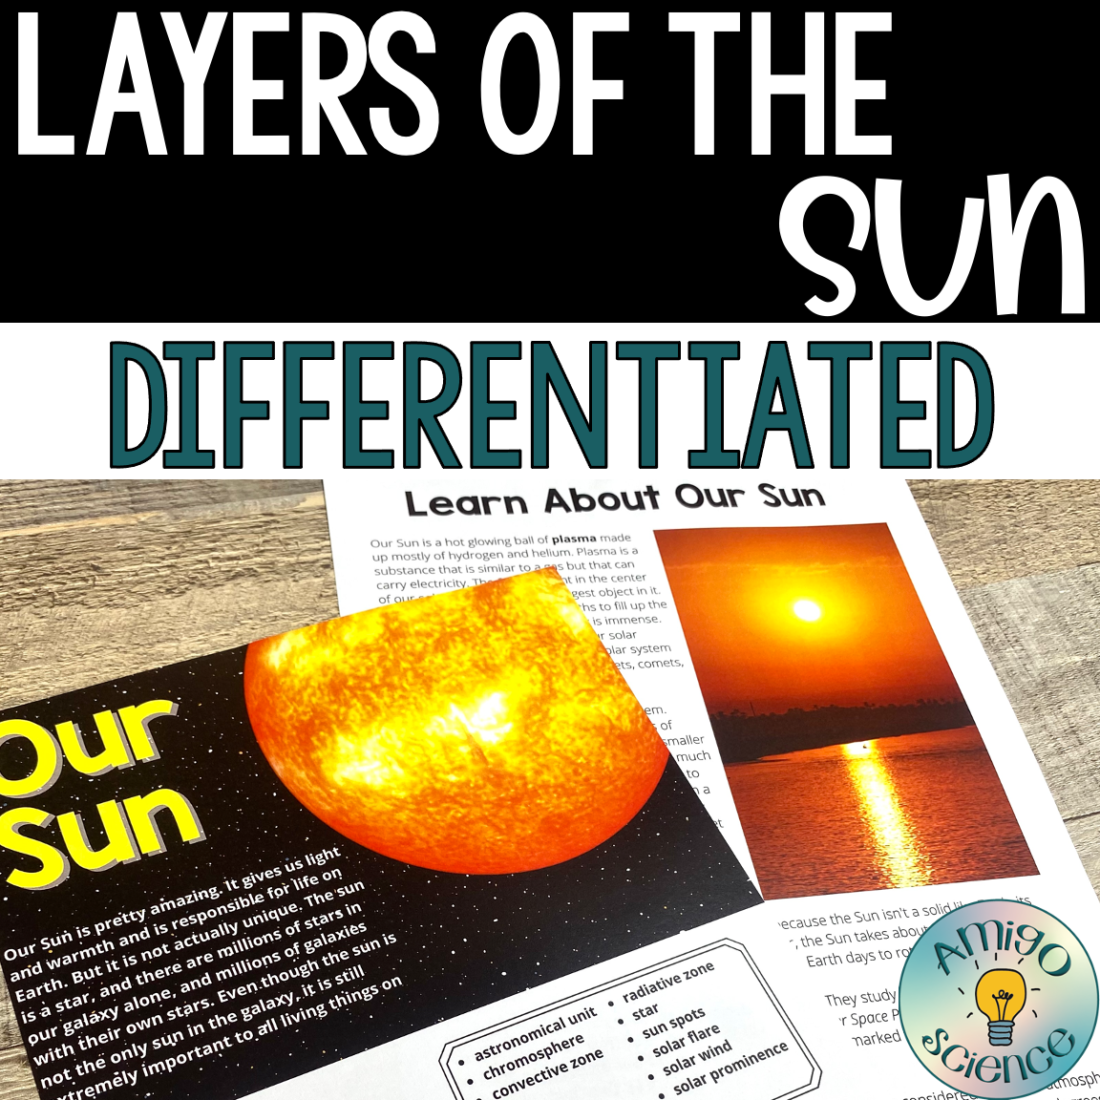 layers of the sun lesson, layers of the sun worksheet, layers of the sun quiz, layers of the sun activity